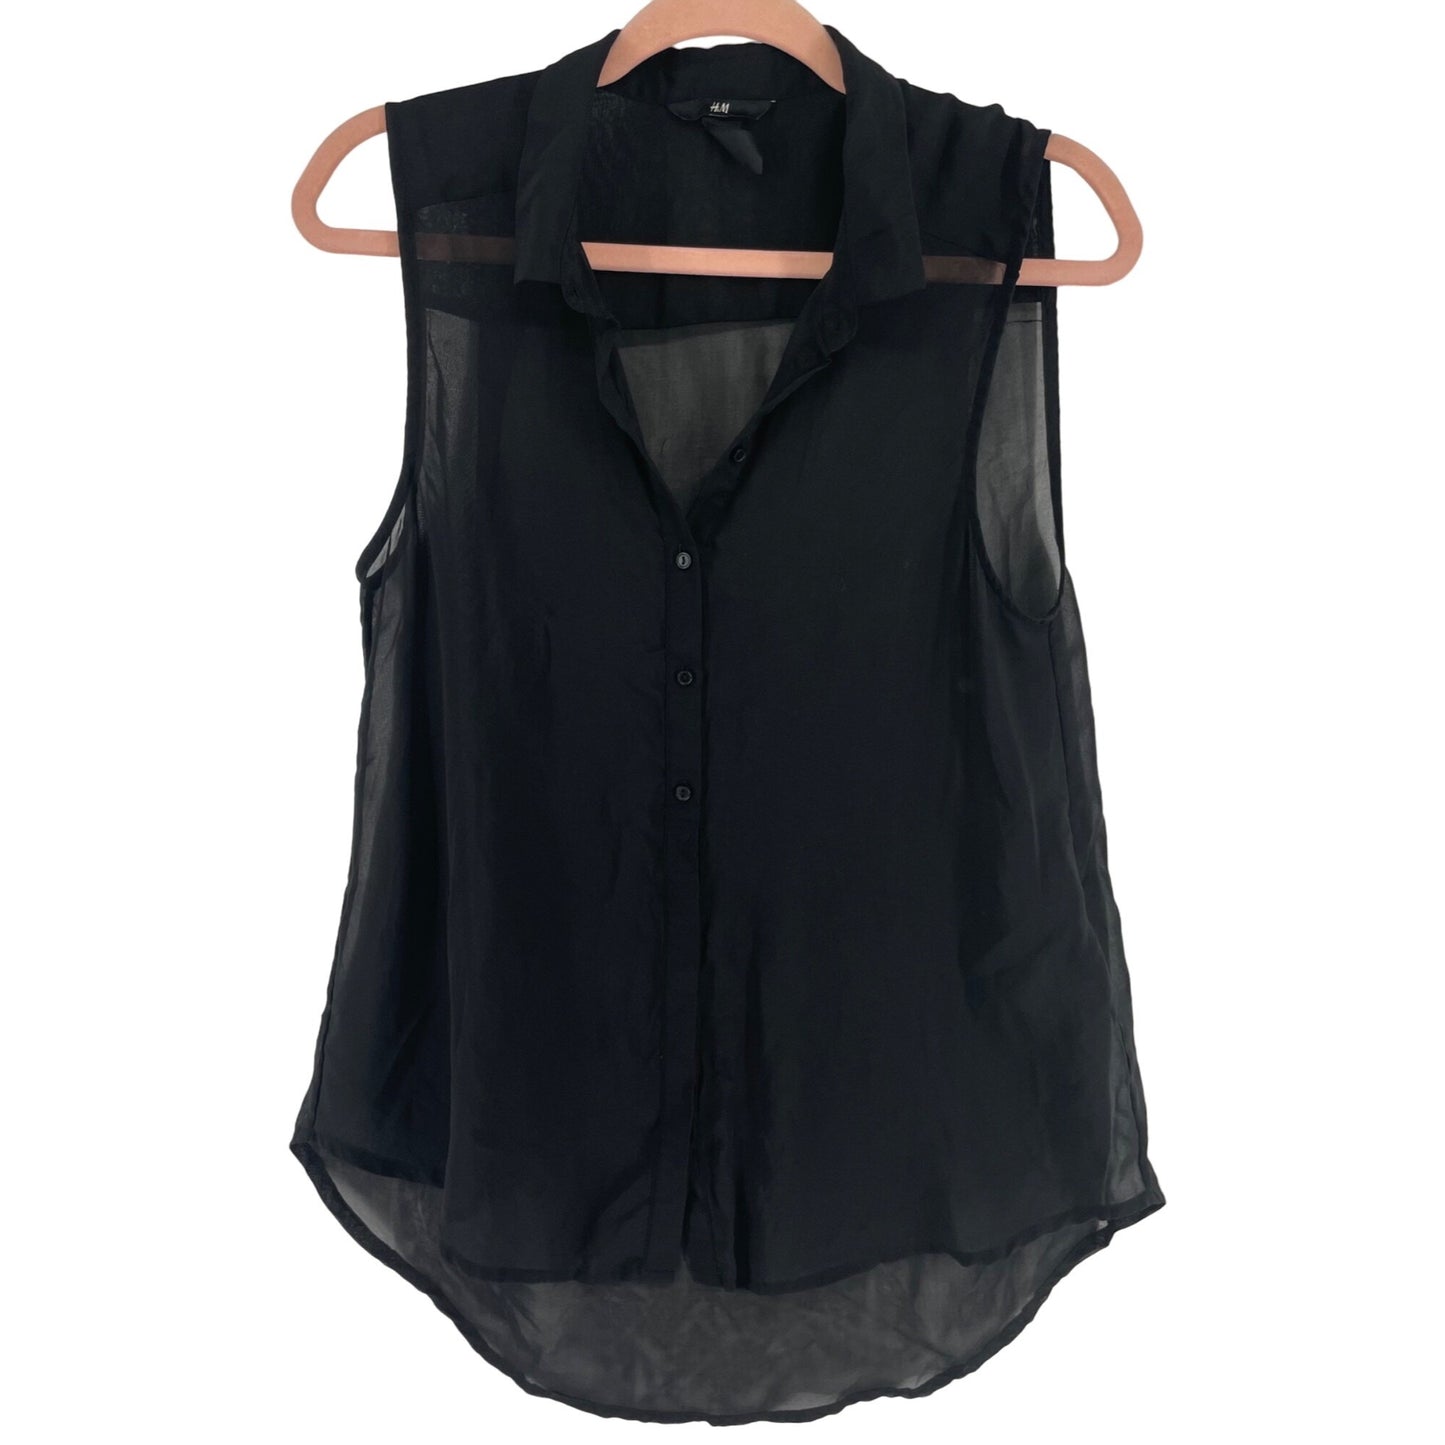 CLEARANCE H&M Women's Size 8 Black Sleeveless Sheer Button-Down Blouse